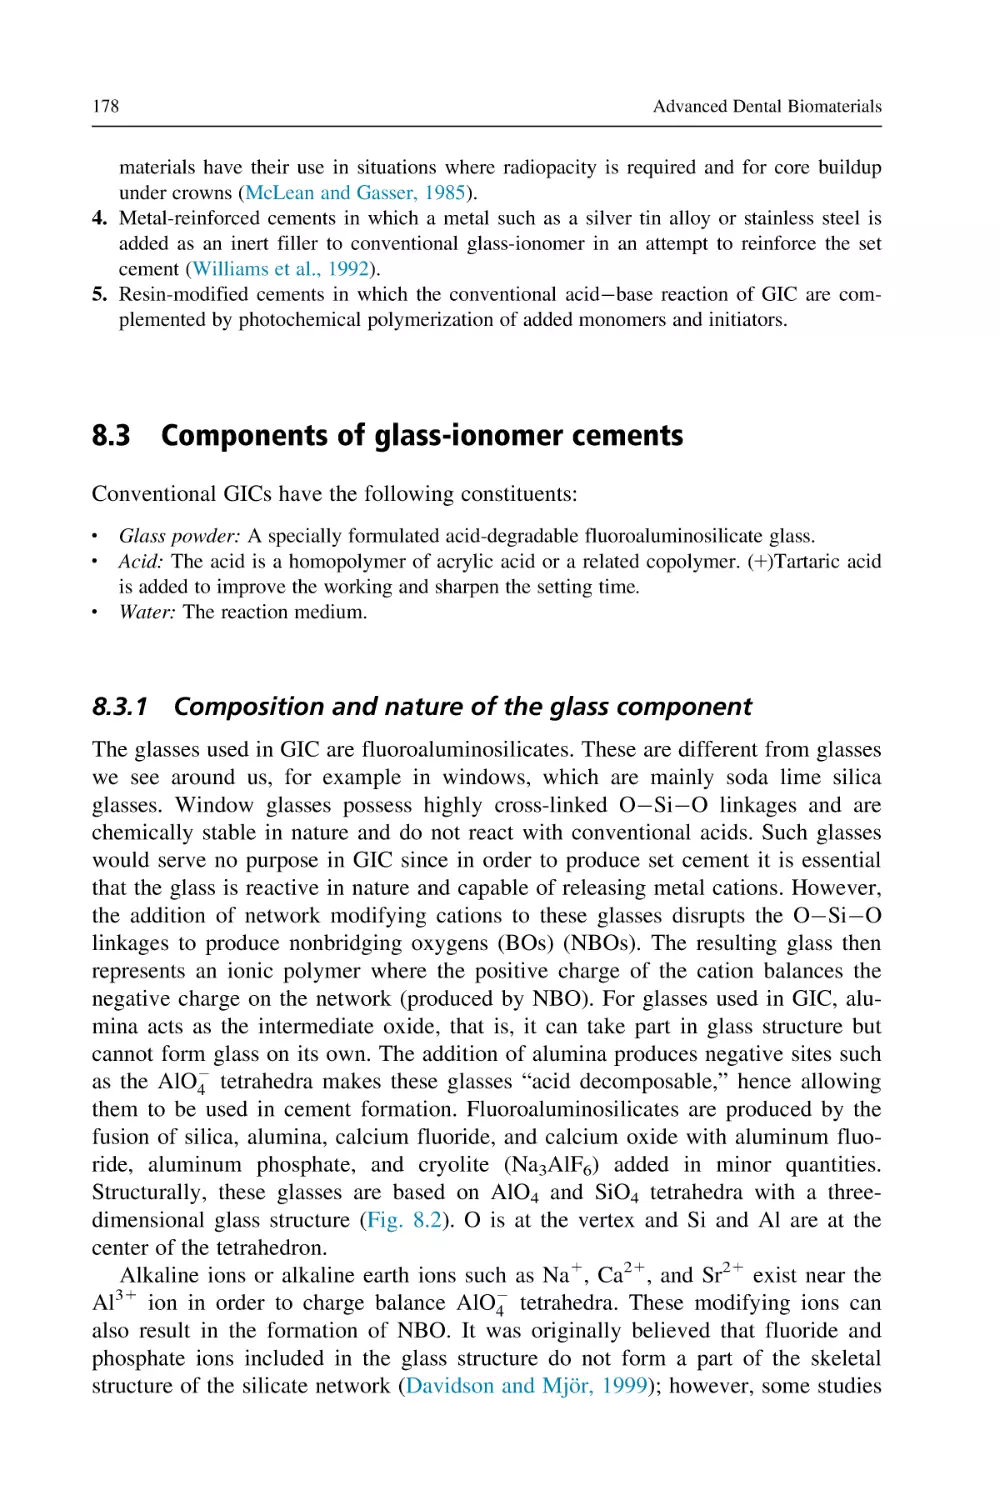 8.3 Components of glass-ionomer cements
8.3.1 Composition and nature of the glass component